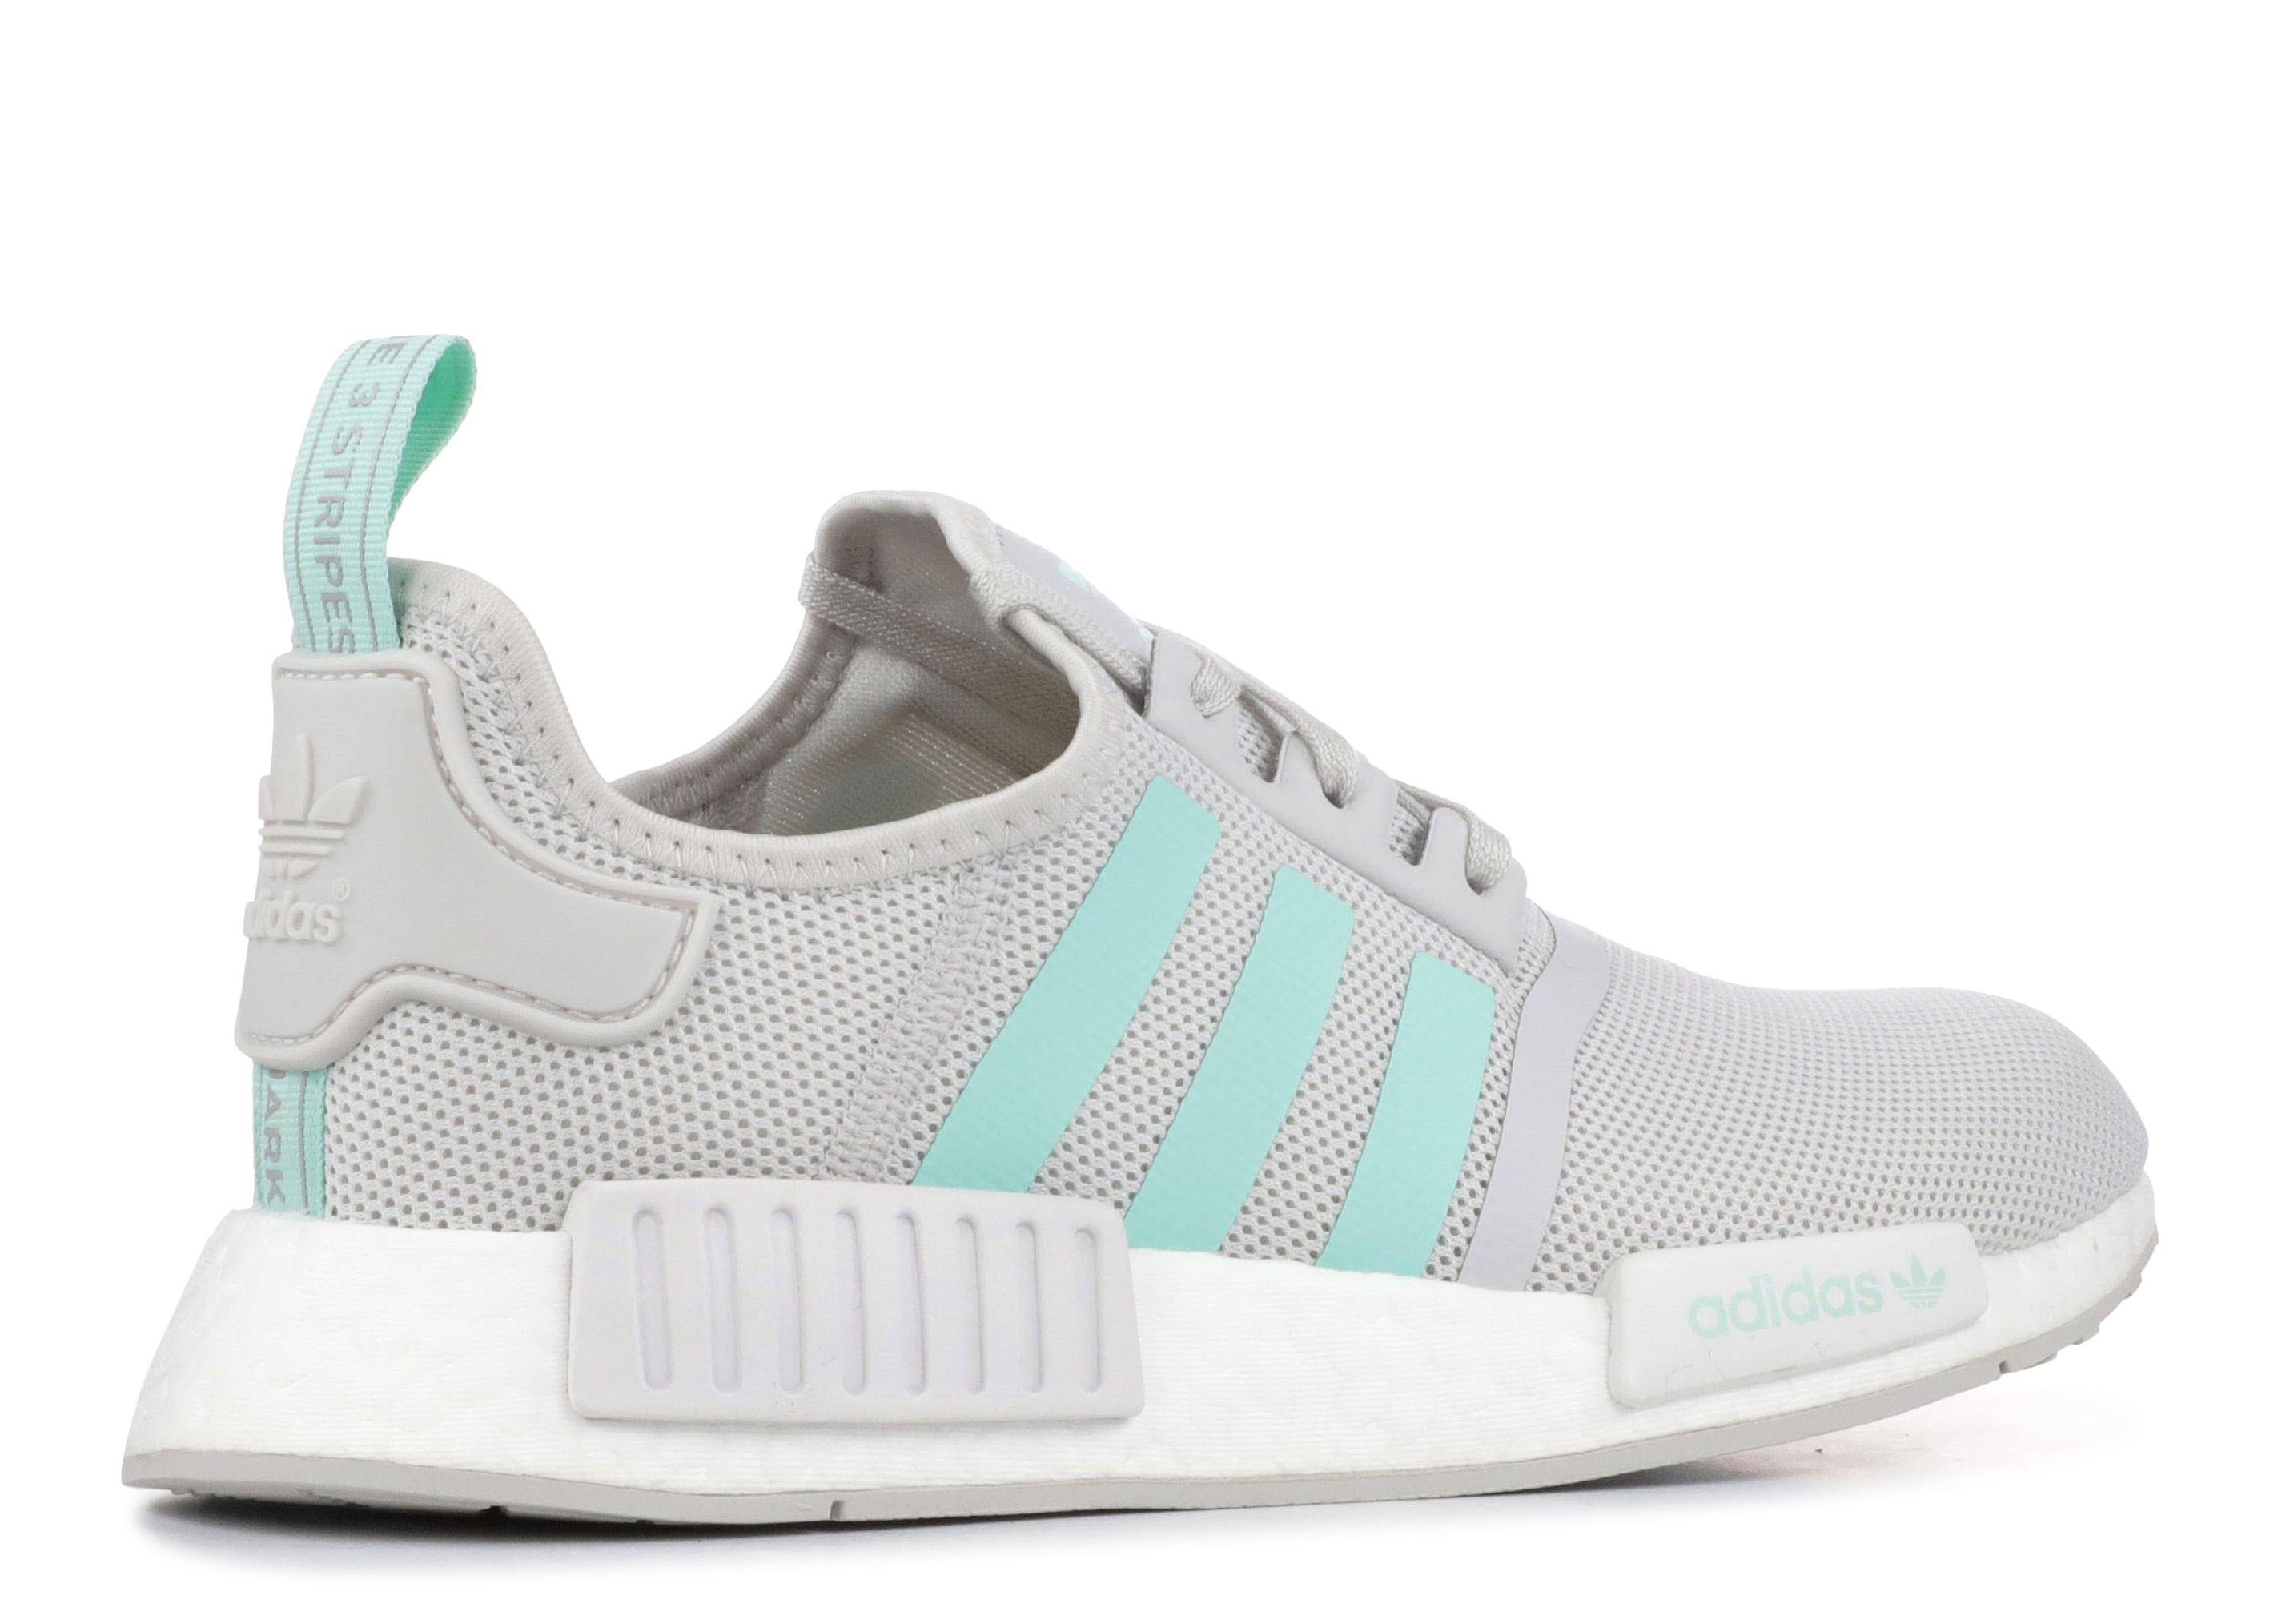 nmd clear mint